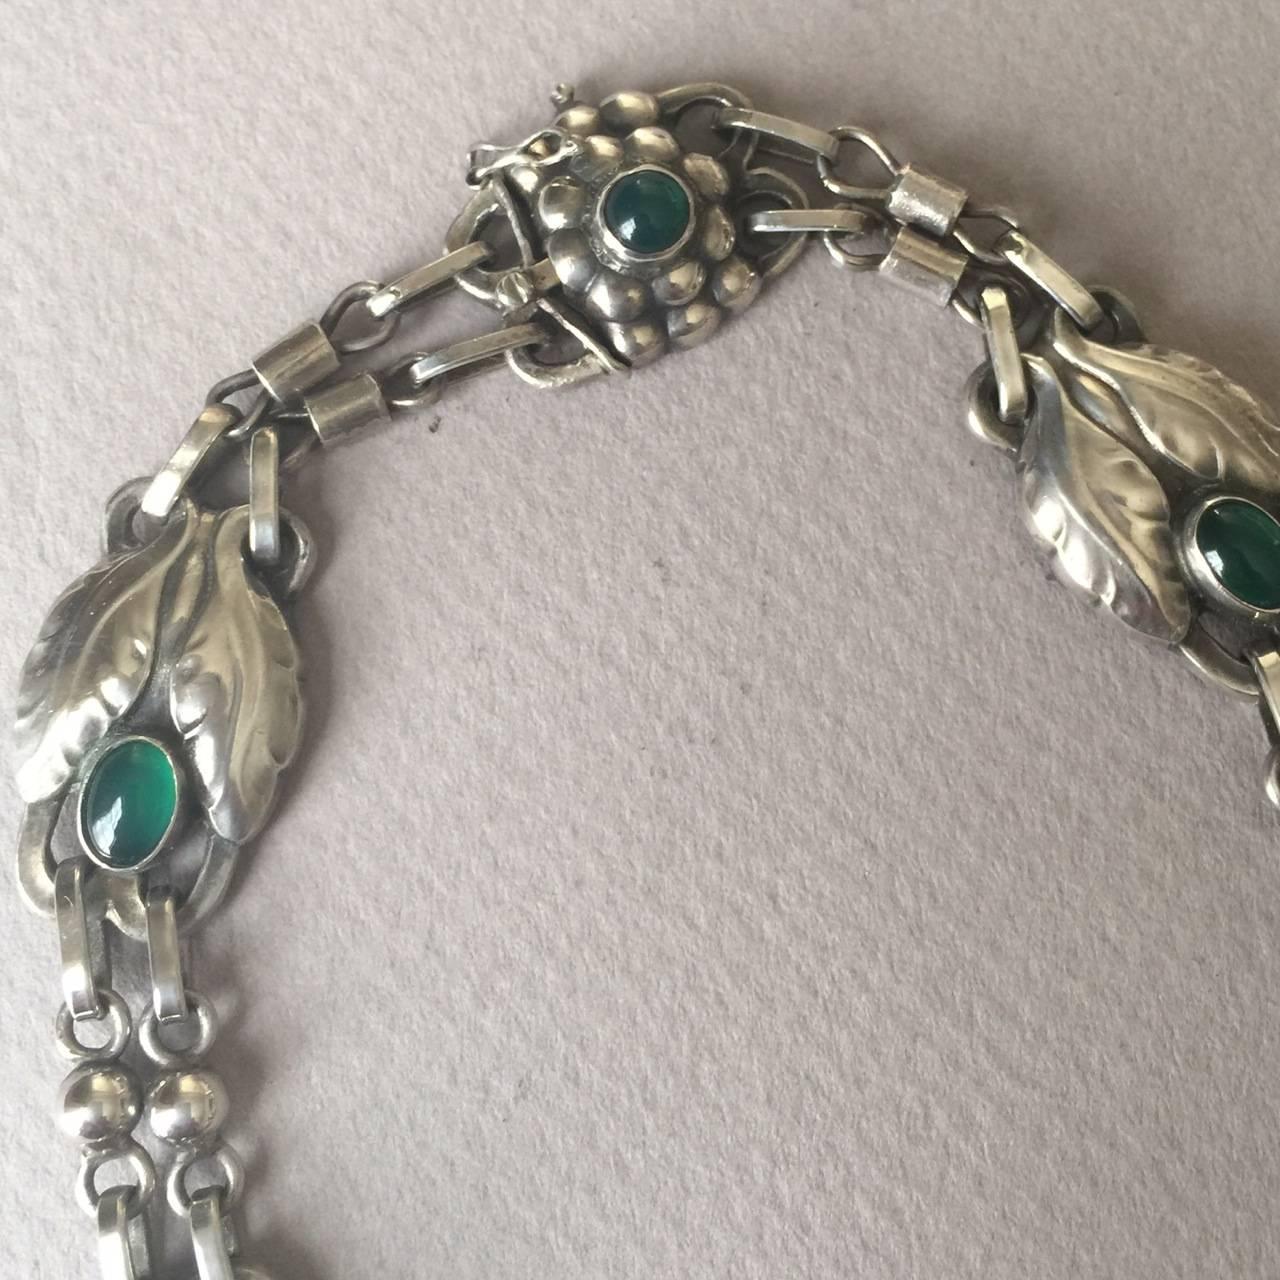 Georg Jensen 830 Silver Necklace No. 1 with Green Chrysoprase.

Designed by Georg Jensen in 1904, this stunning piece has hallmarks from the 1920's.

This necklace is articulated beautifully so that it lays perfectly on the neck and breastbone. It